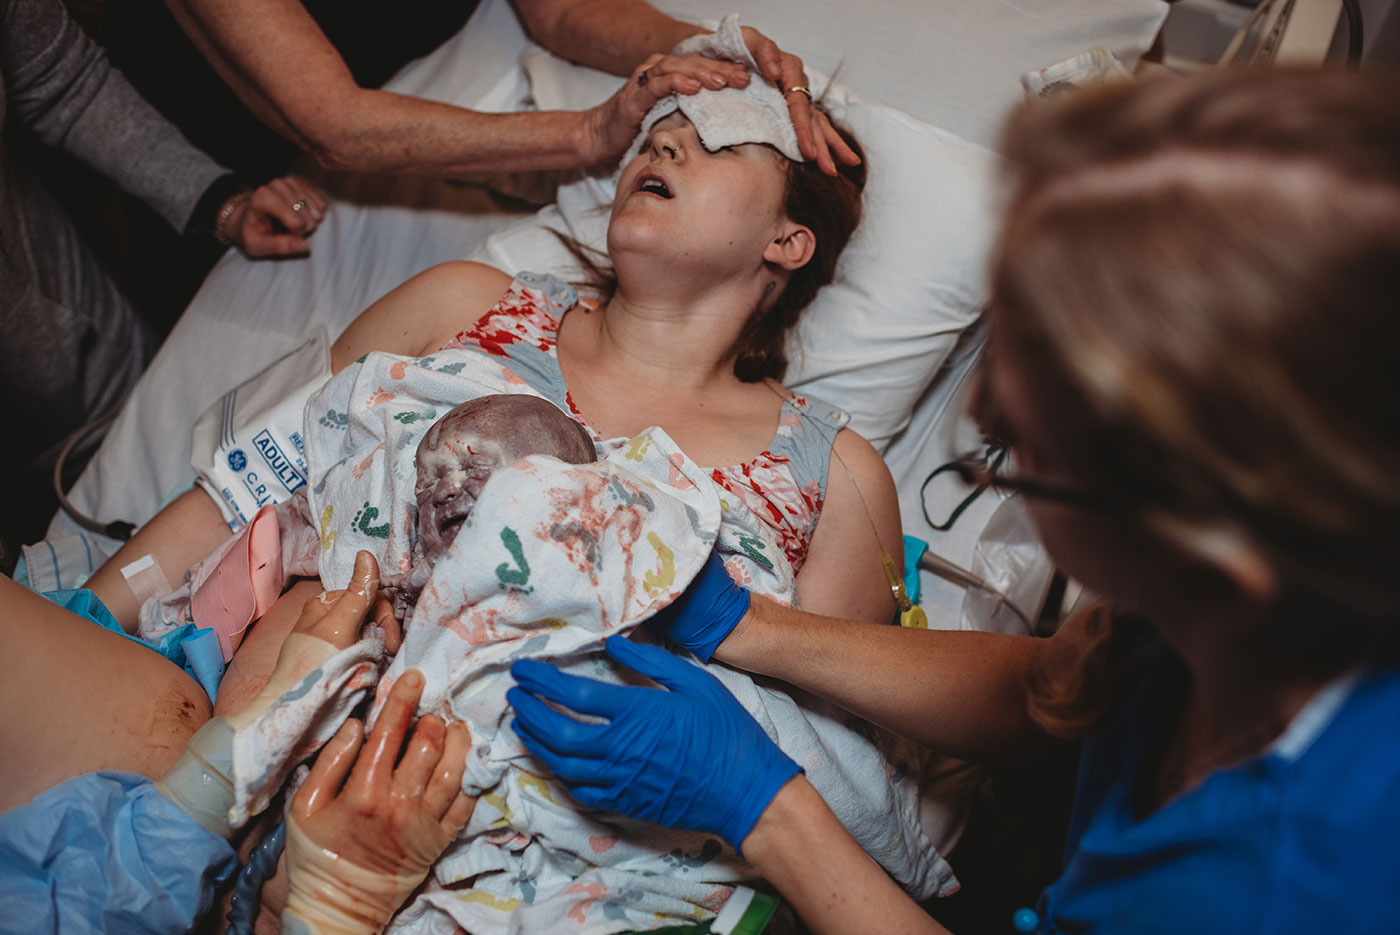 newborn baby covered in vernix is placed on mother's chest immediately after birth